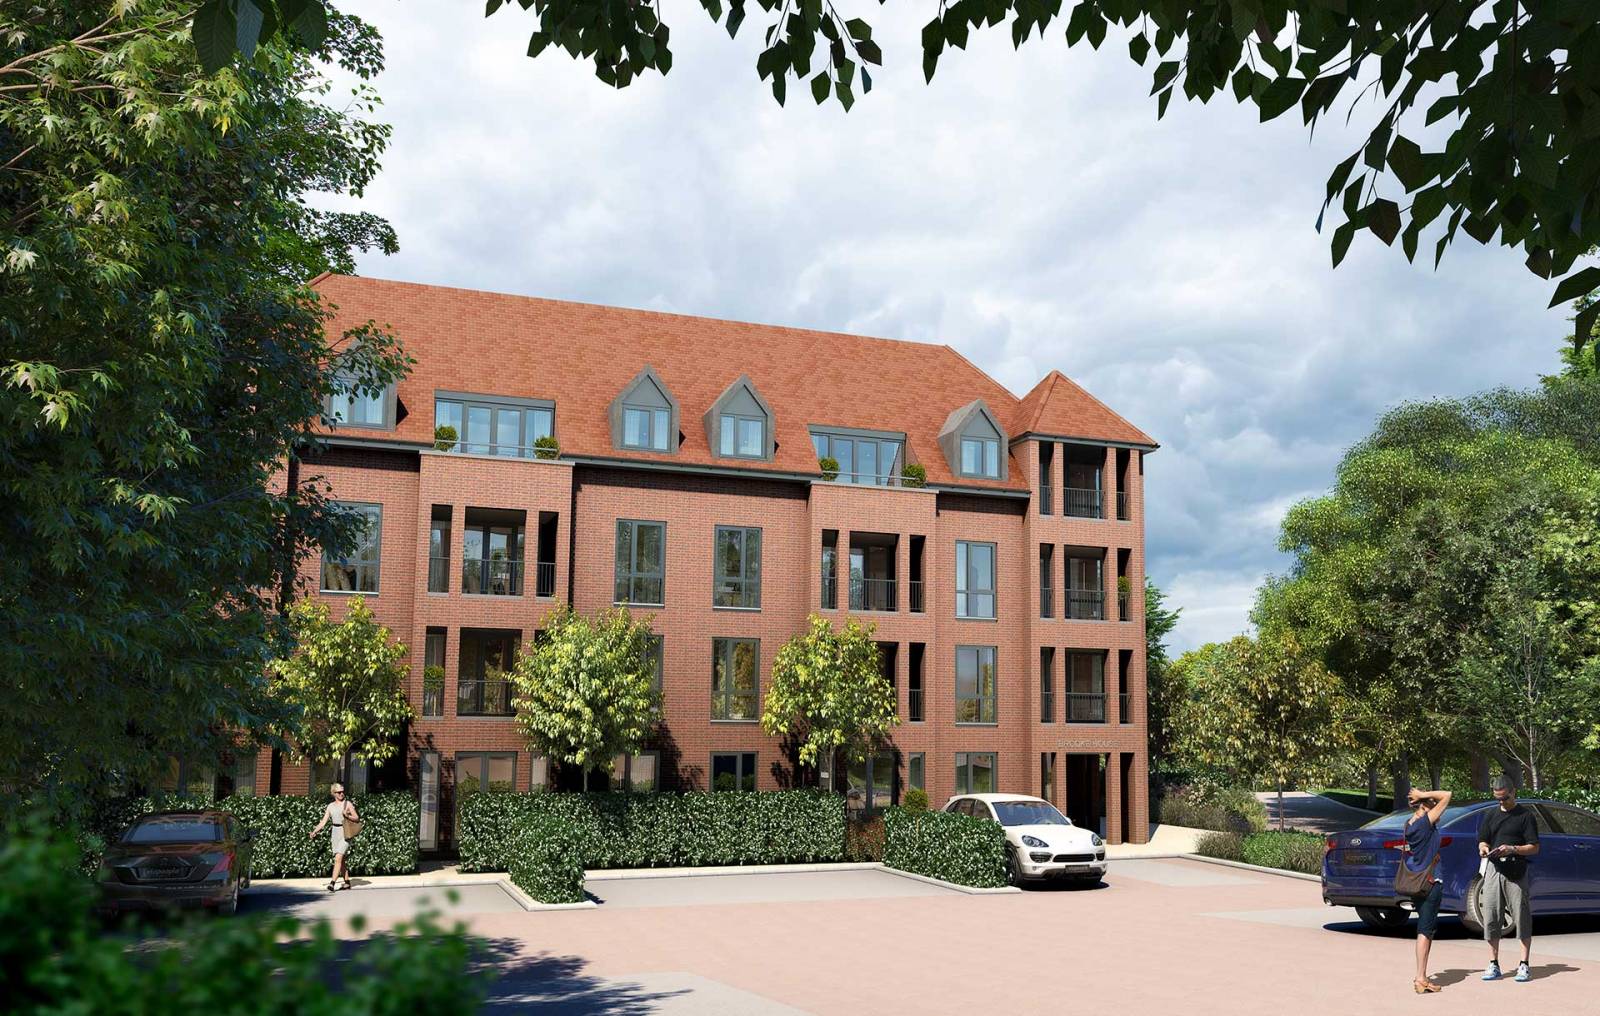 New build homes and developments in Richmond upon Thames